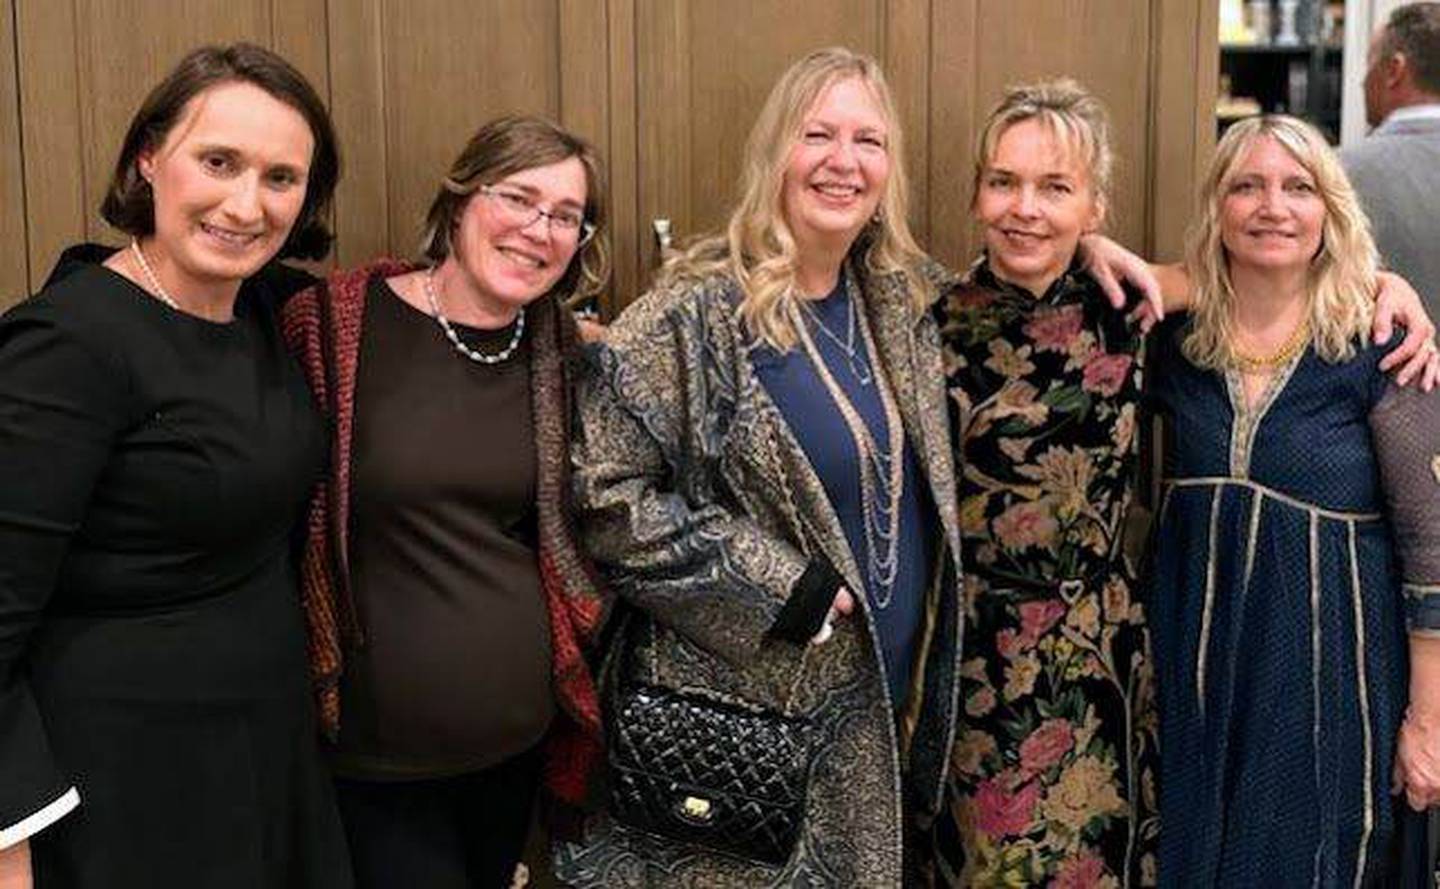 Photo of the members of The Camerata Chicago Ladies Guild (based in Wheaton) - Left to right Tammy Van Cleave, Anna Brazier, Alisa Maloney, Ariane Hall and Holly Moses.  Photo Mike Van Cleave